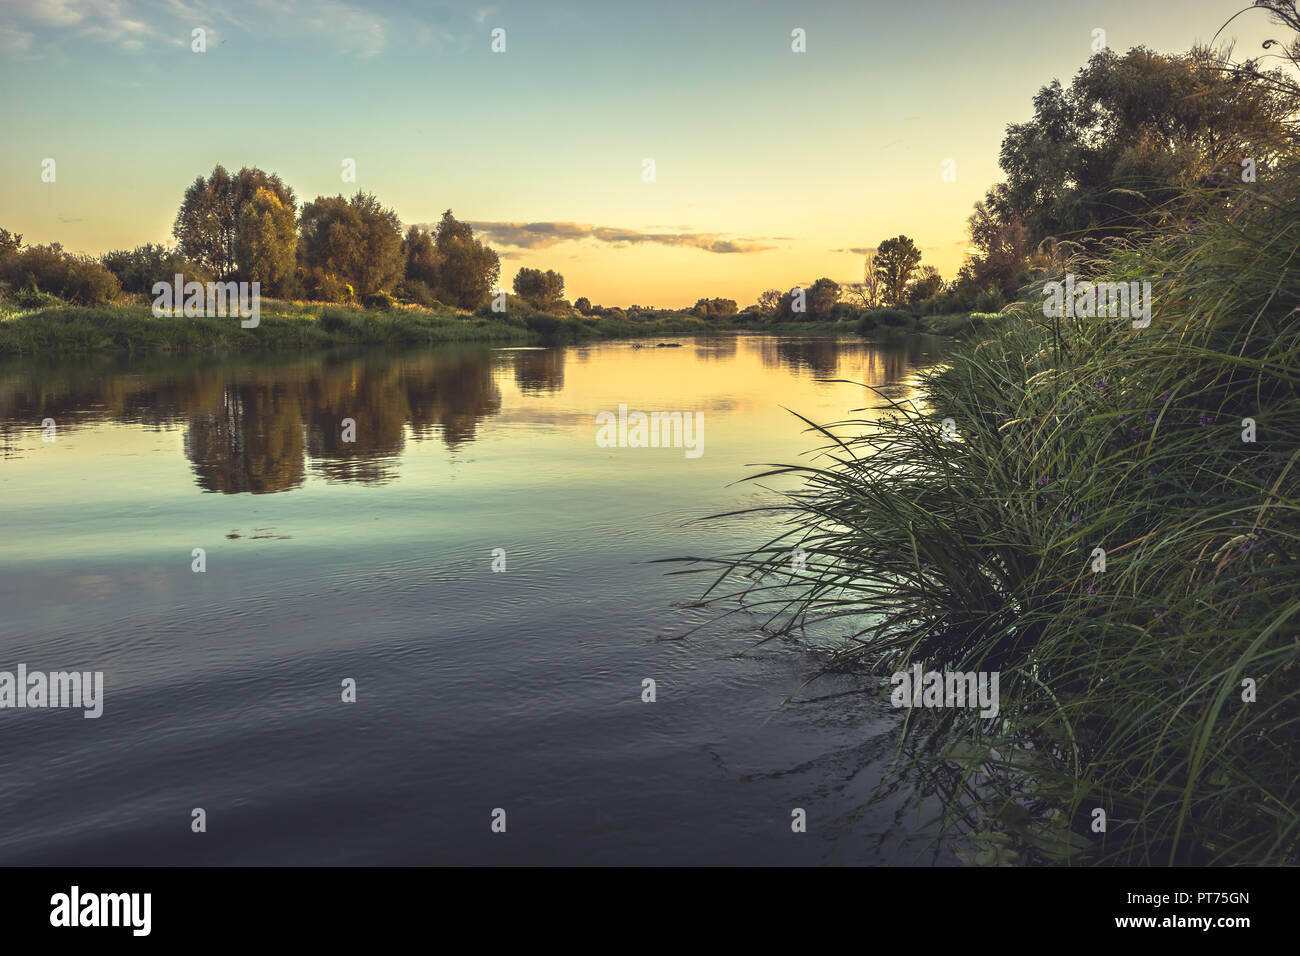 Summer season rustic countryside calm river landscape sunset with clear sky reflections riverbank in vintage style Stock Photo